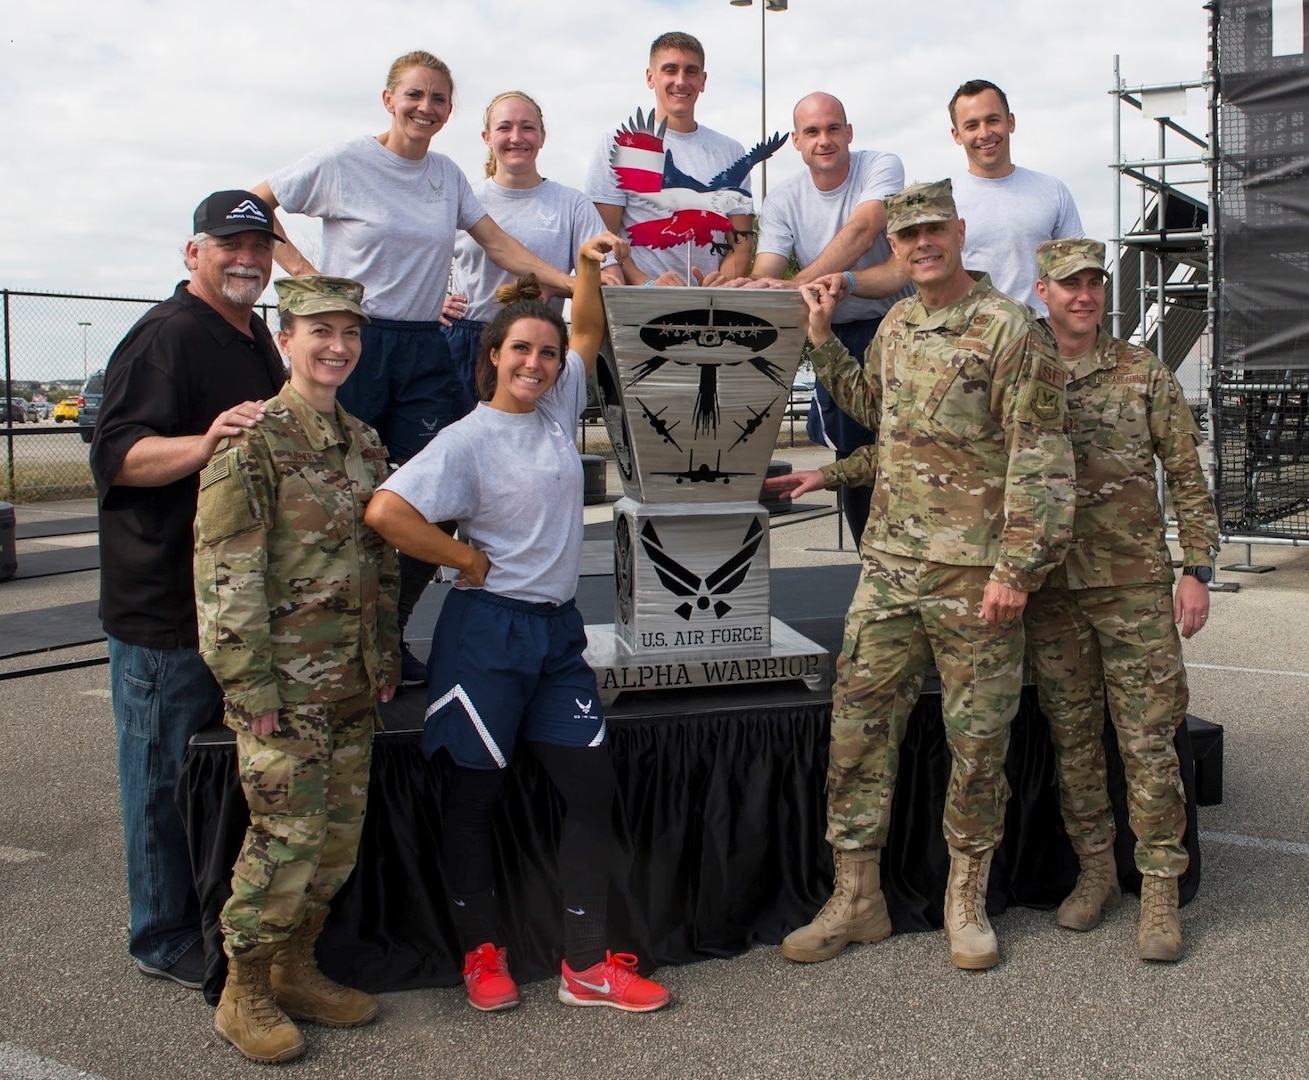 The first Inter-Service Alpha Warrior Battle took place Nov. 17, 2018, at the Alpha Warrior Proving Grounds, Retama Park in Selma, Texas. The Air Force took home the title inter-service champions with a team finish time of 2:17:33.